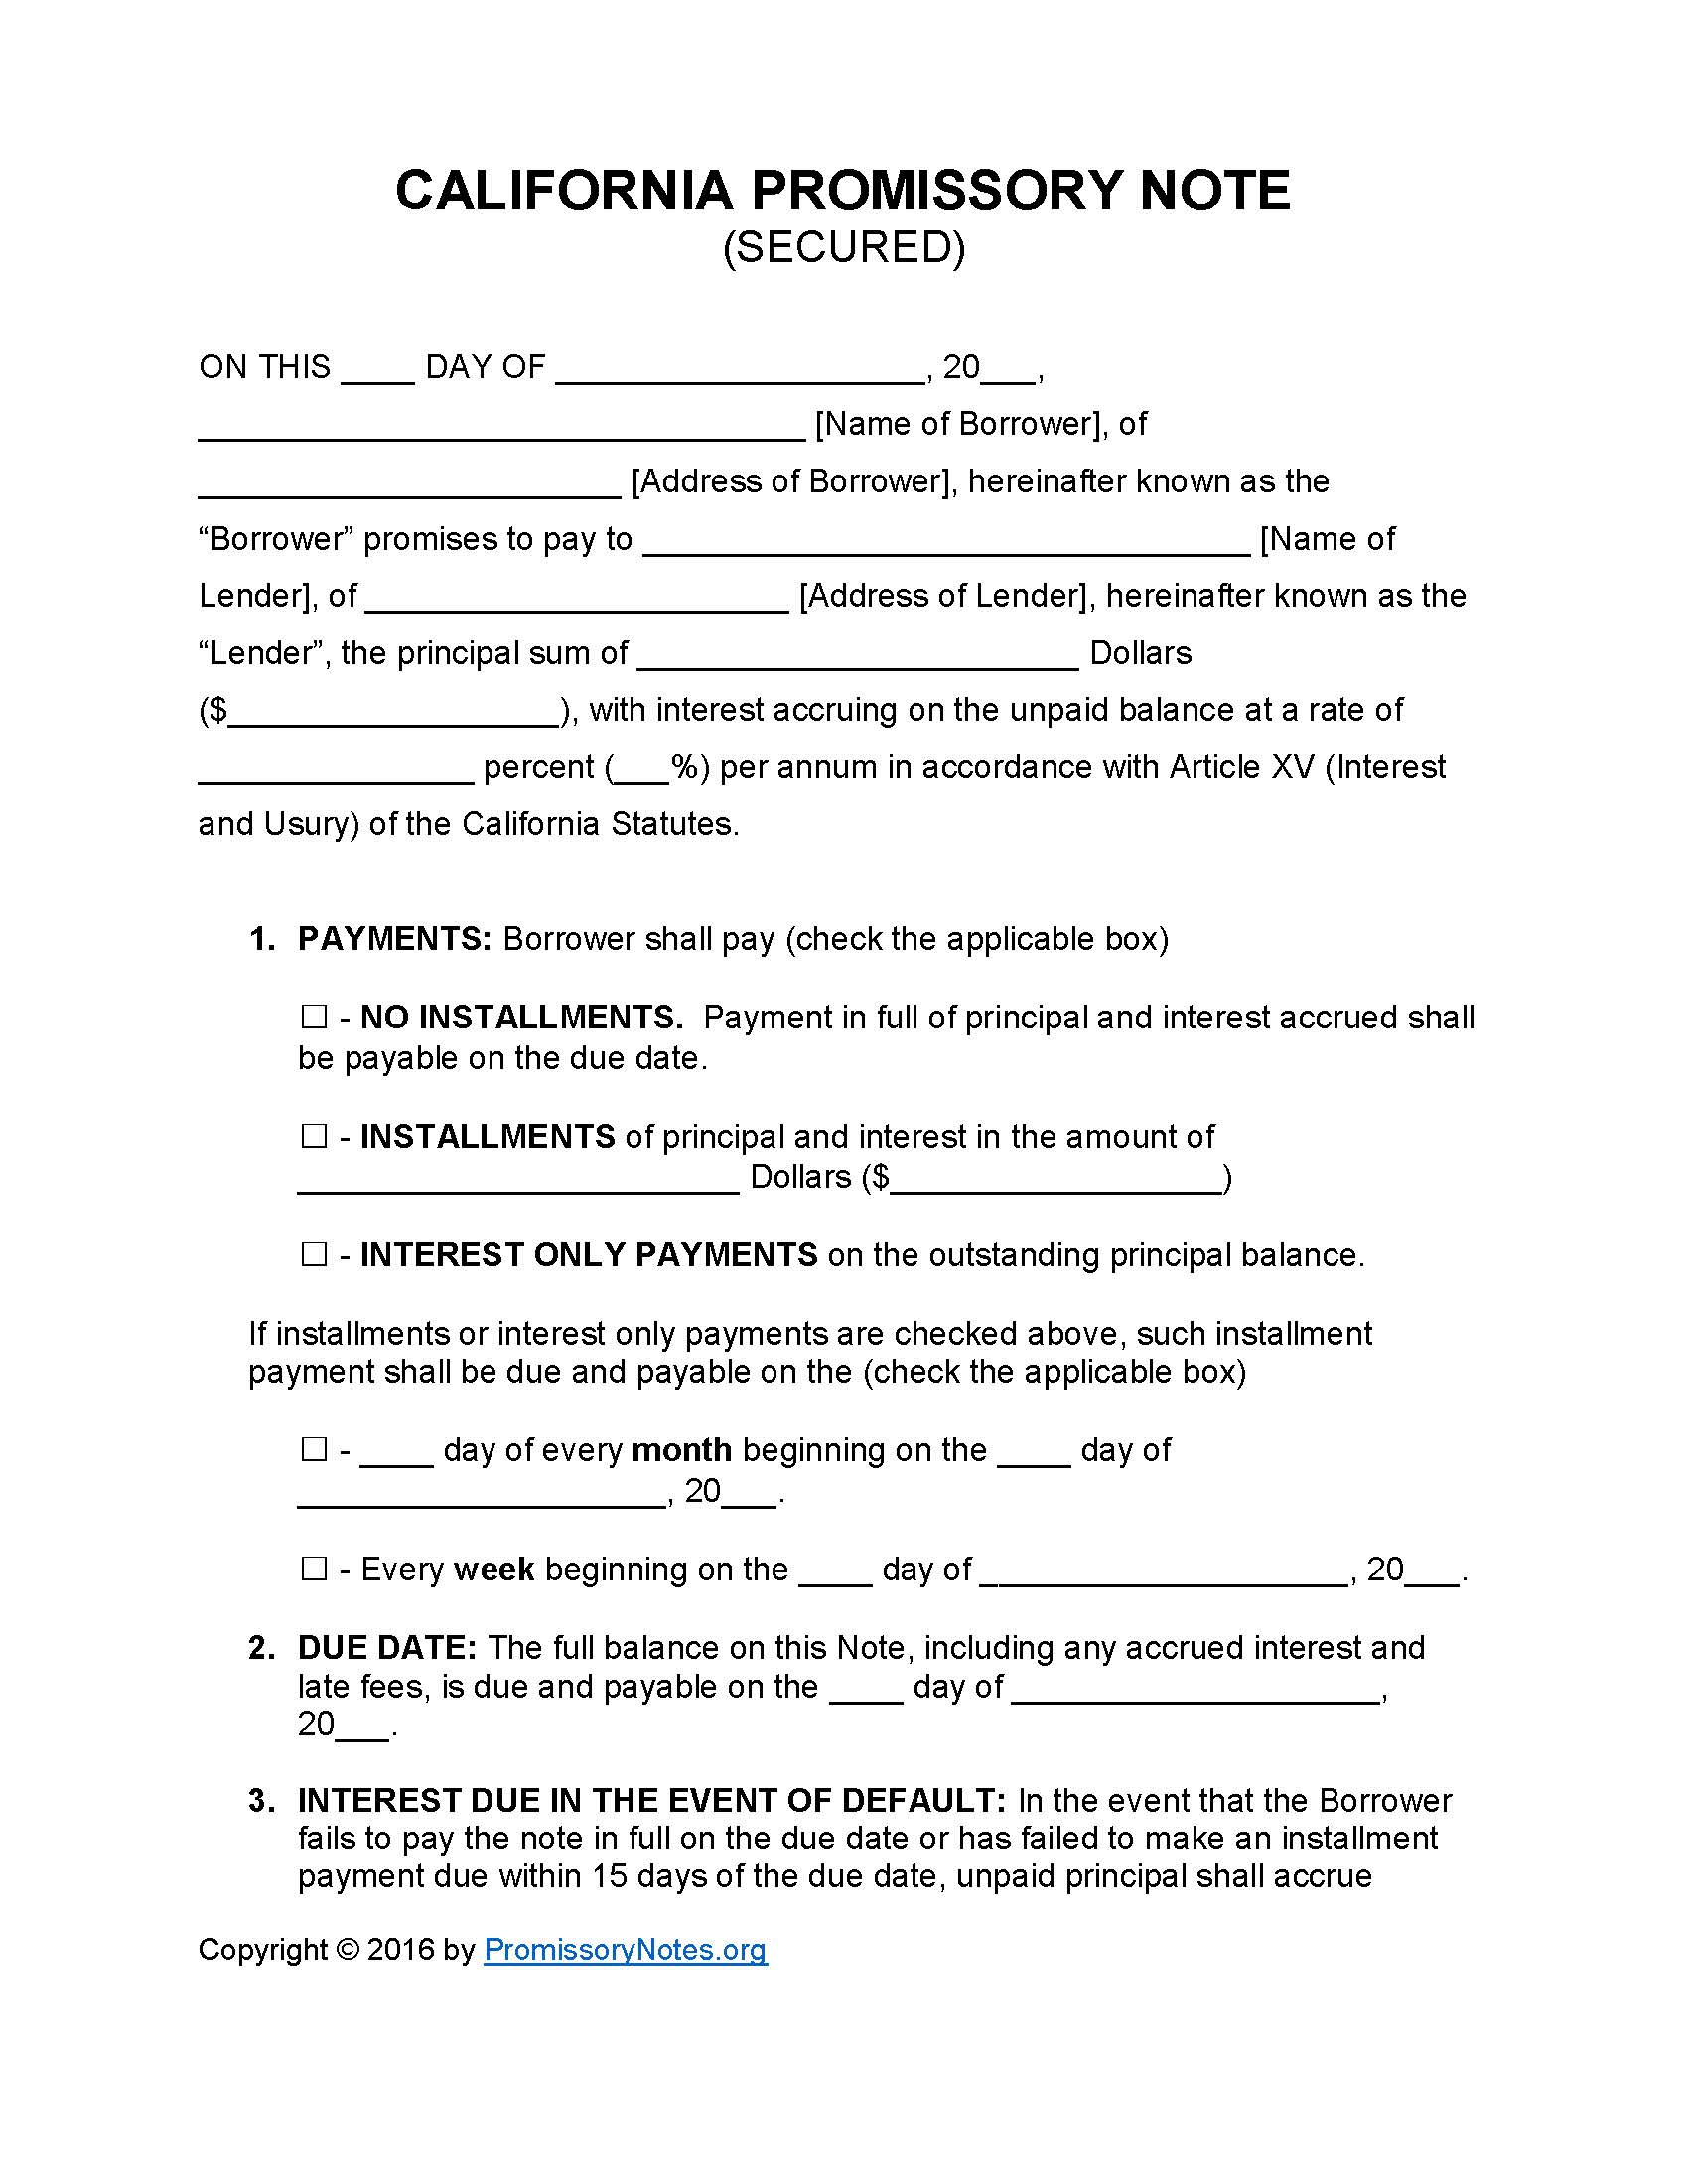 California Secured Promissory Note Template - Promissory Notes